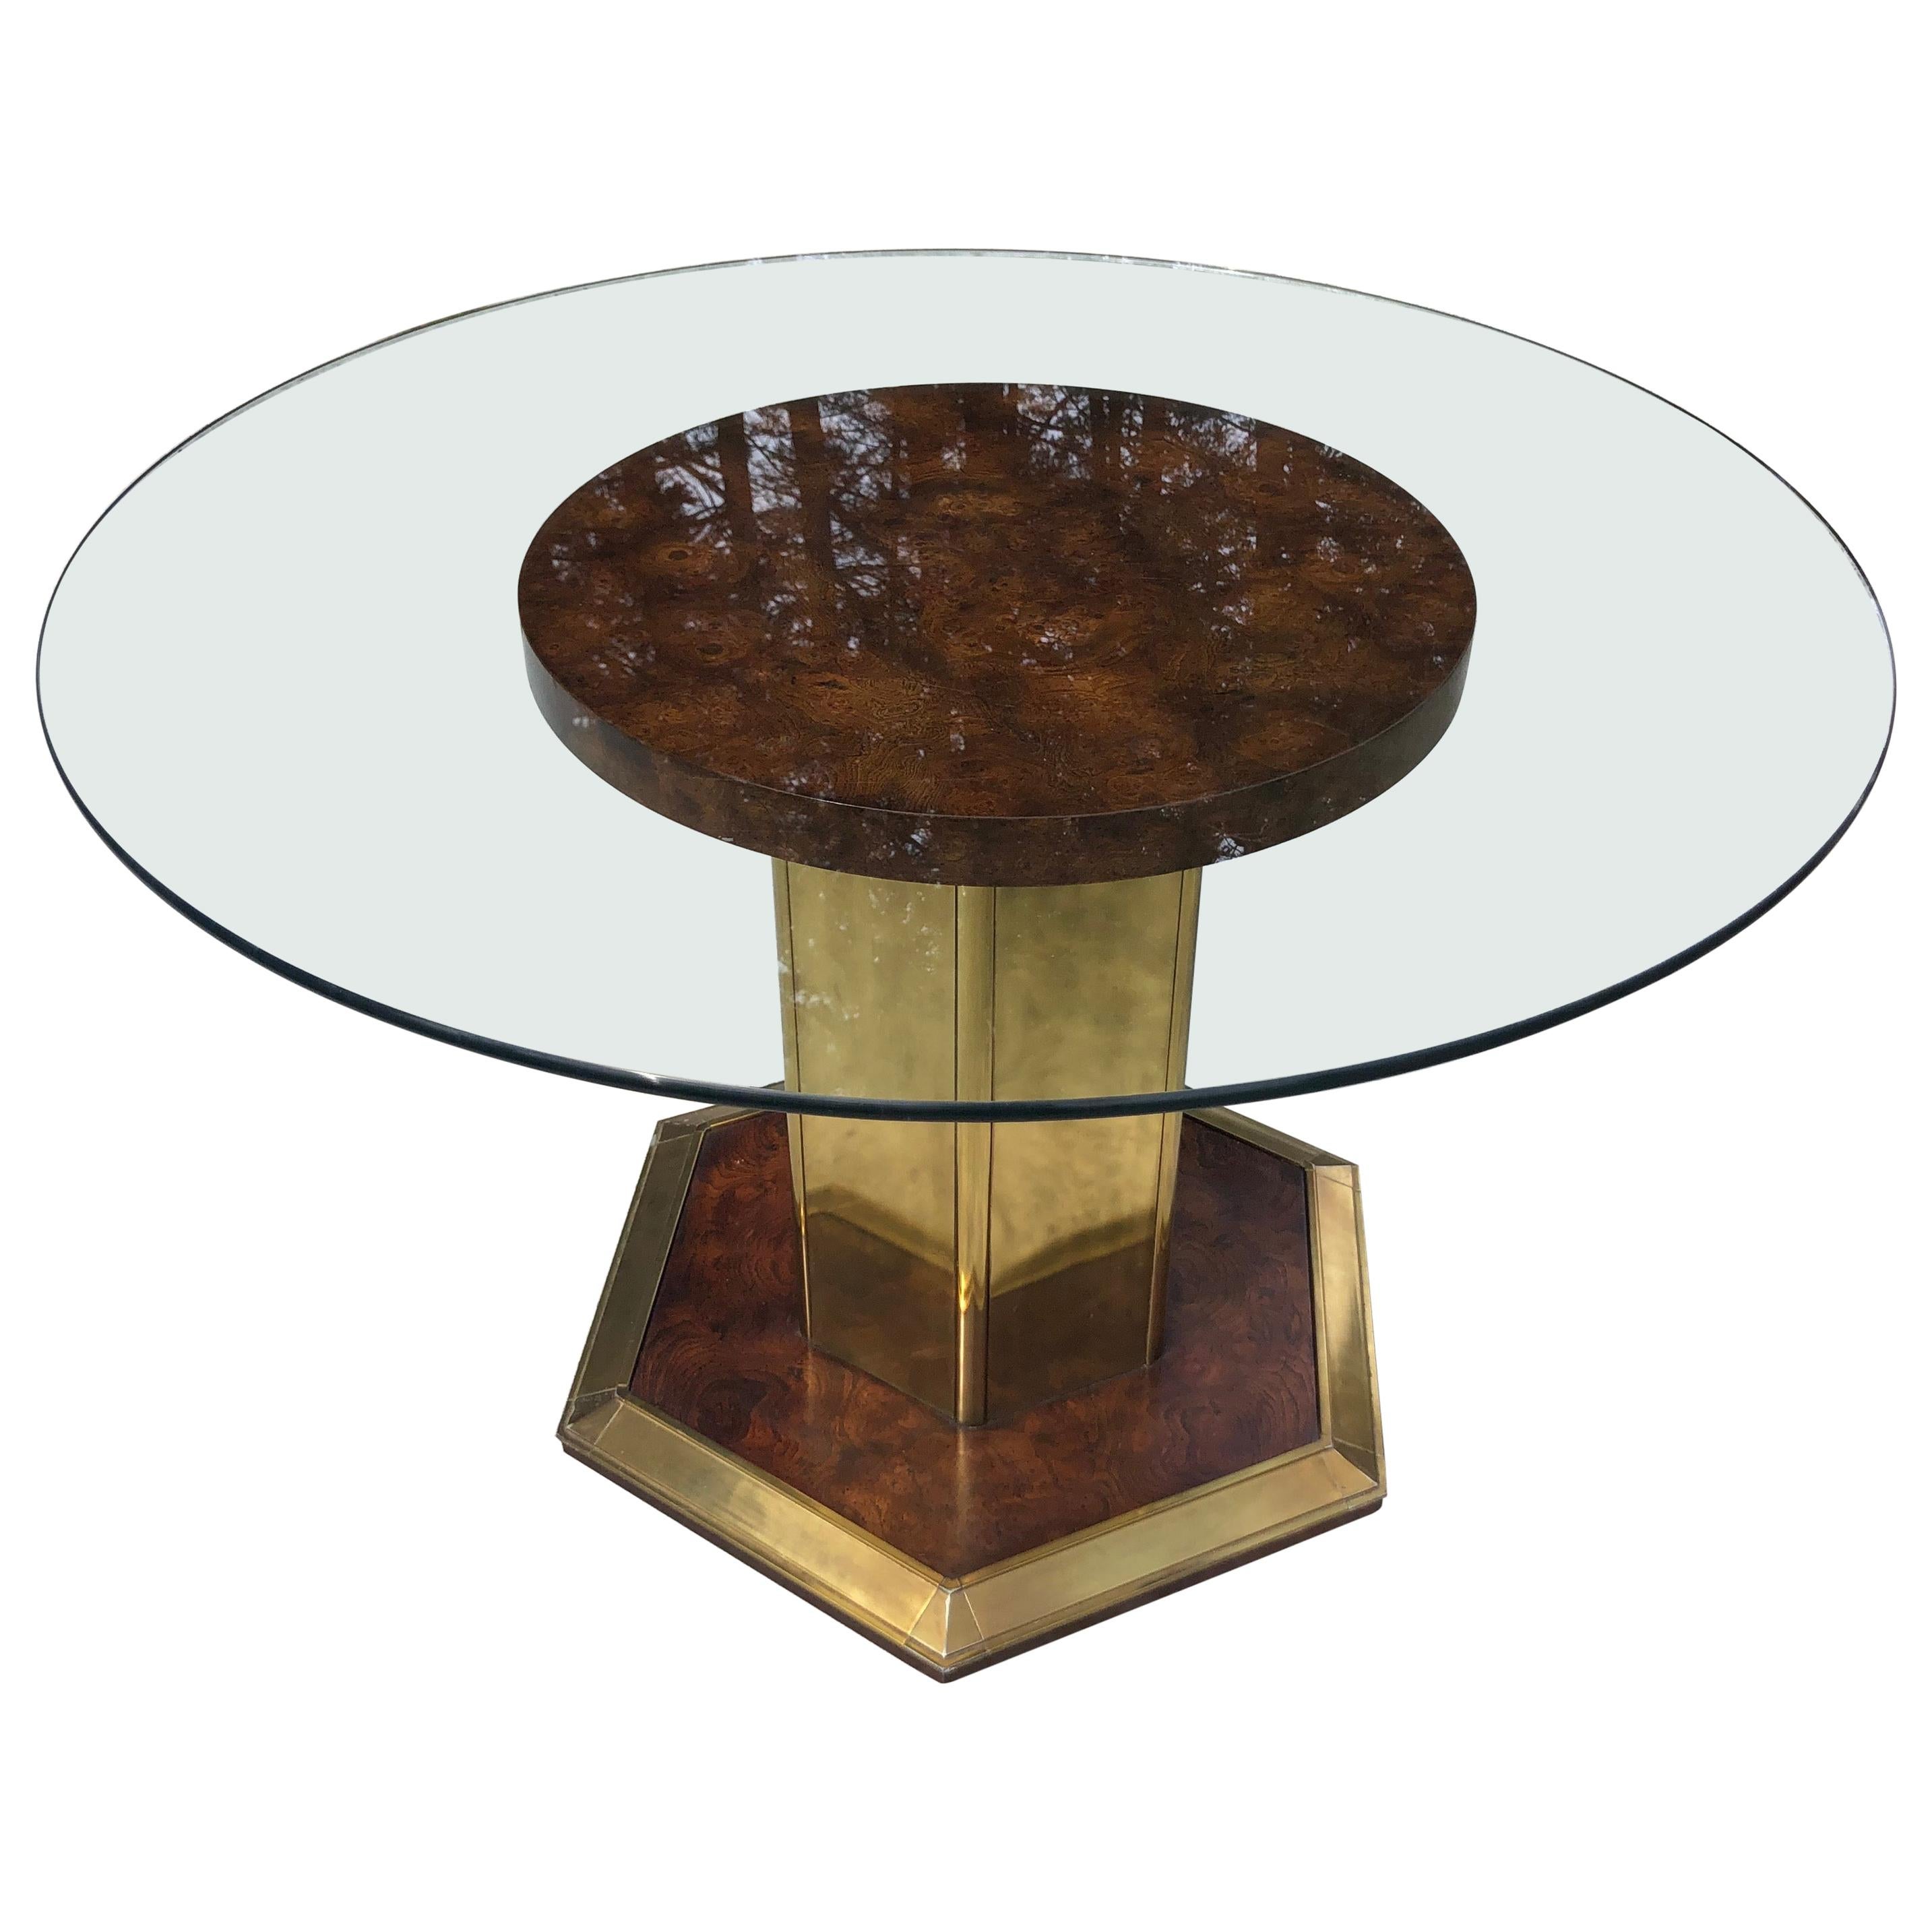 Henredon Style Round Burlwood Dining Table with Glass Top